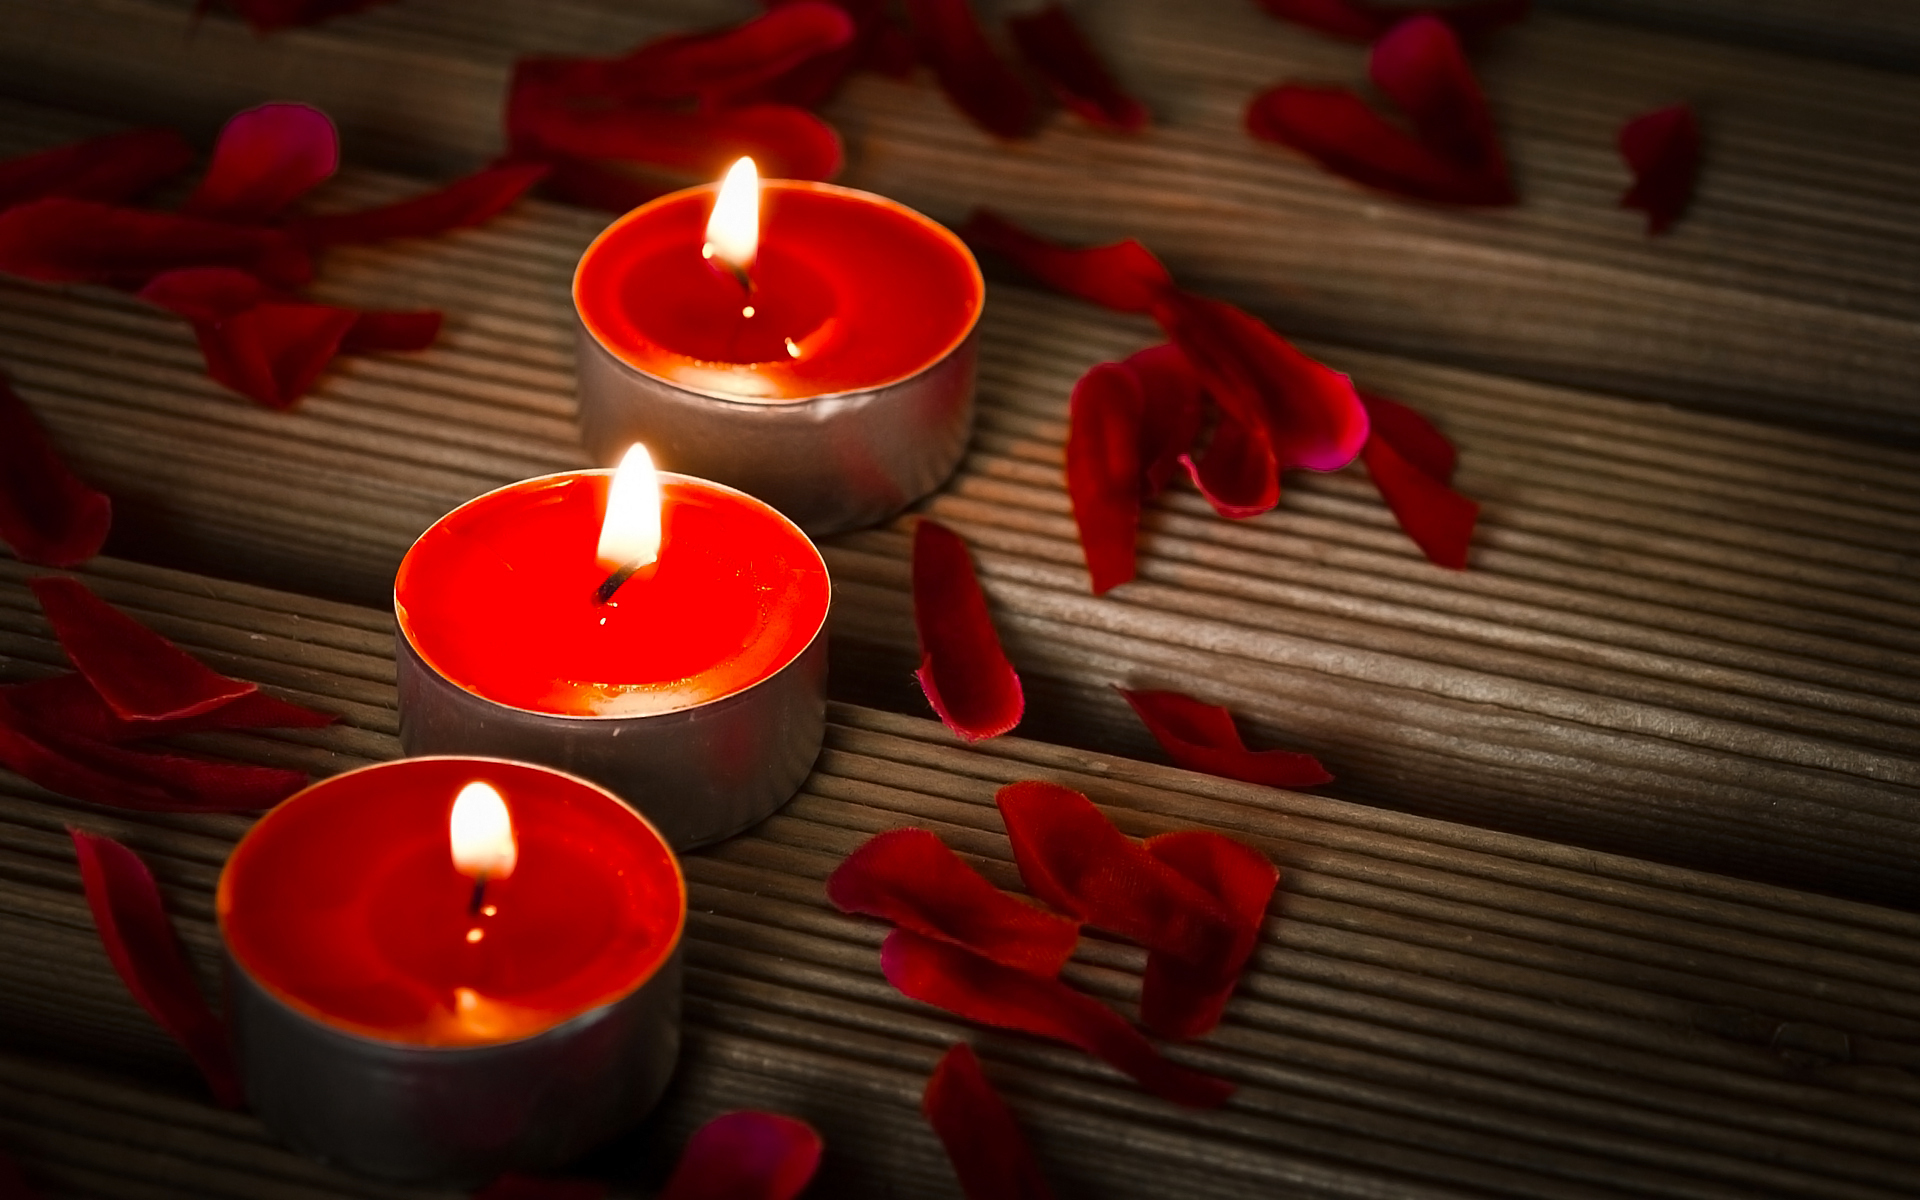 Candles Petals And Romance Wallpapers   1920x1200   1078943